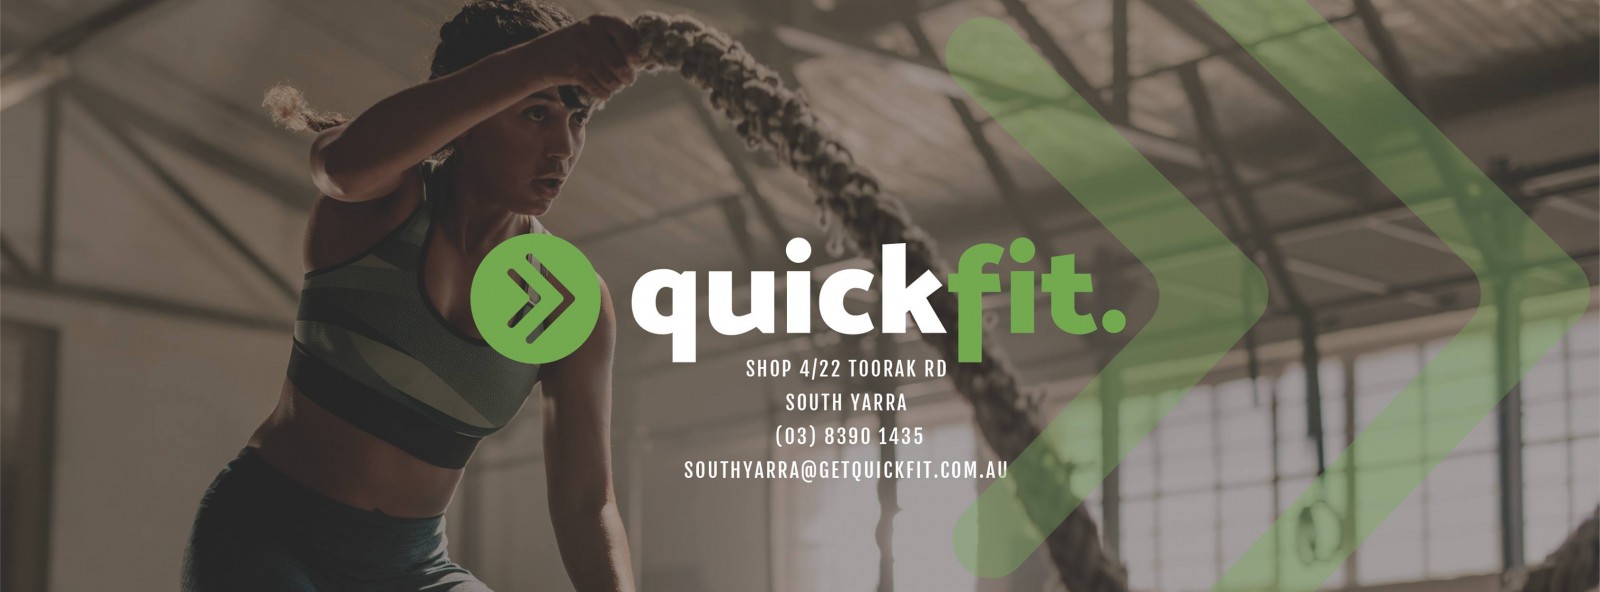 Quickfit - South Yarra